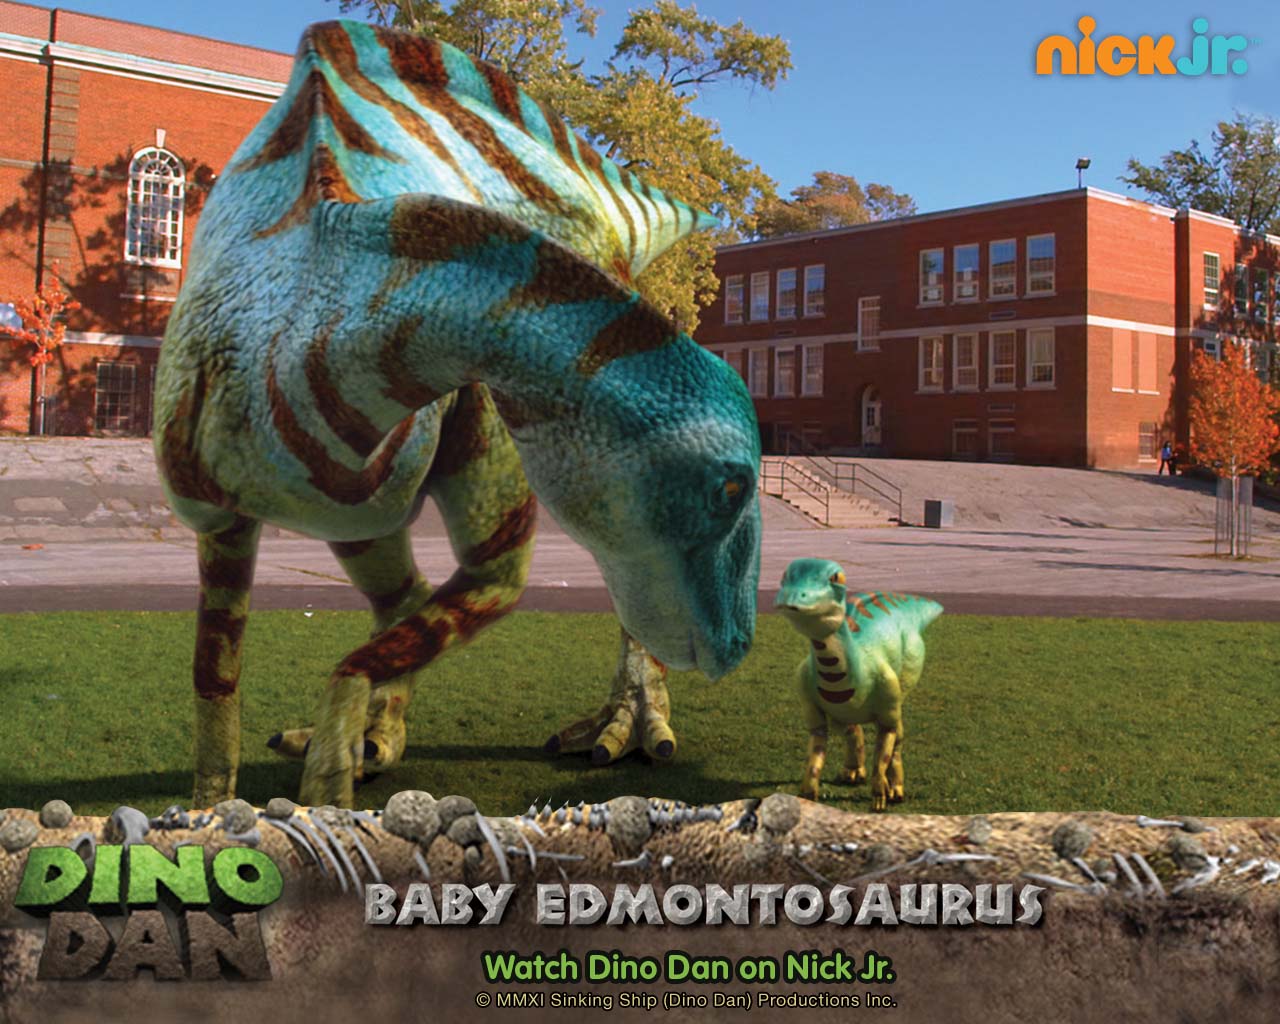 If Your Kids Loves Dinosaurs, Dino Dan: Dino Babies Is a Must Watch! 